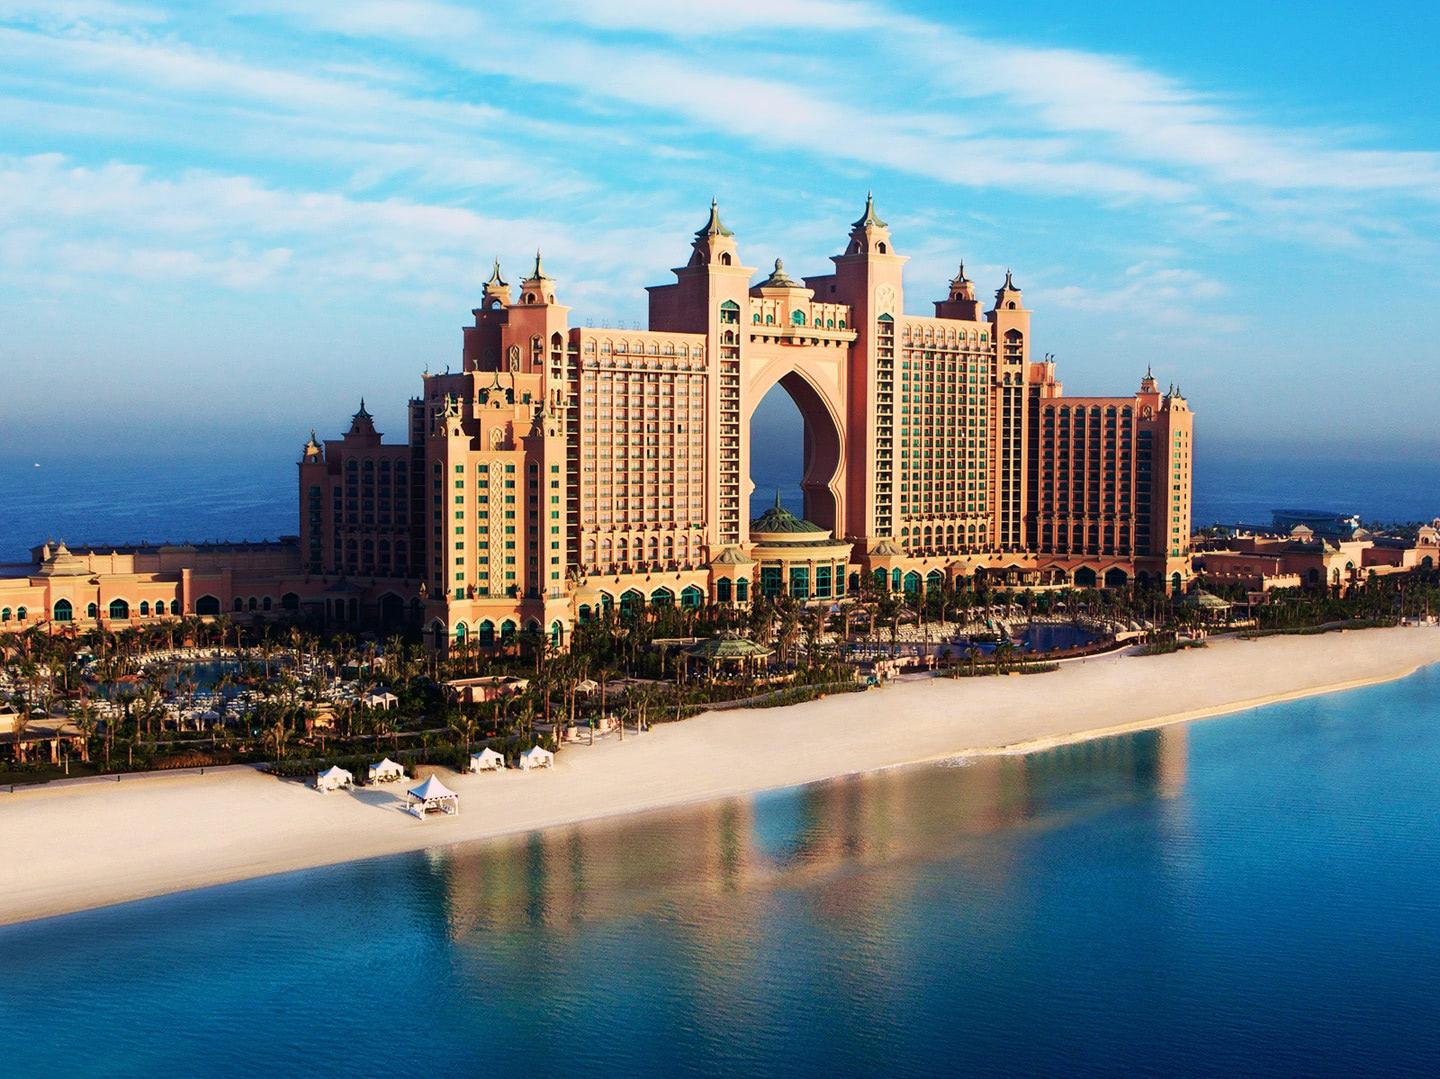 The Wallpaper Of Atlantis Majestic Dubai Hotel Situated On Palm